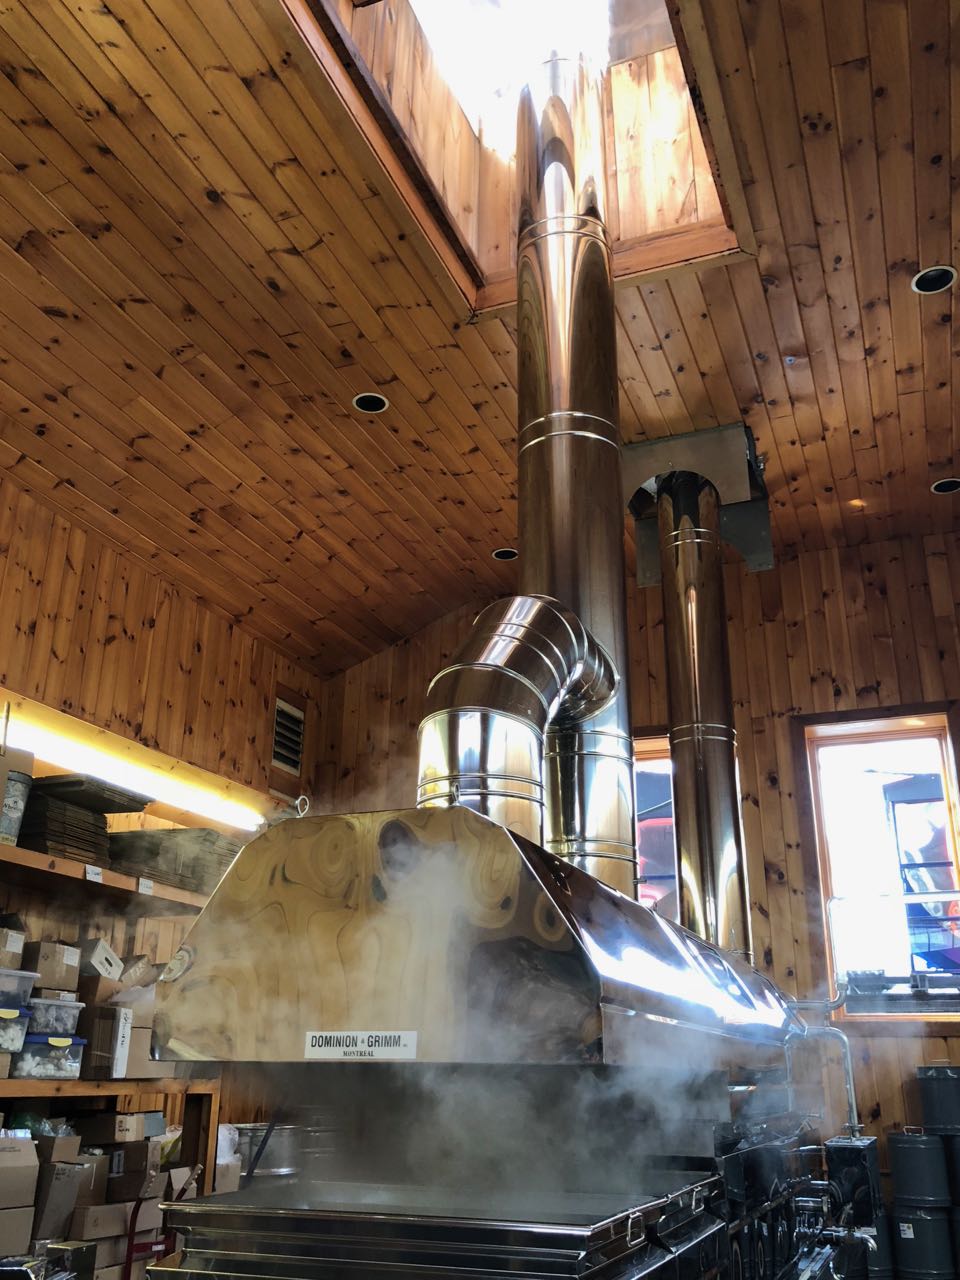 The product offerings and evaporator at Morning Star Maple. &nbsp;The steam from the sap literally streams directly out an opening in the roof!